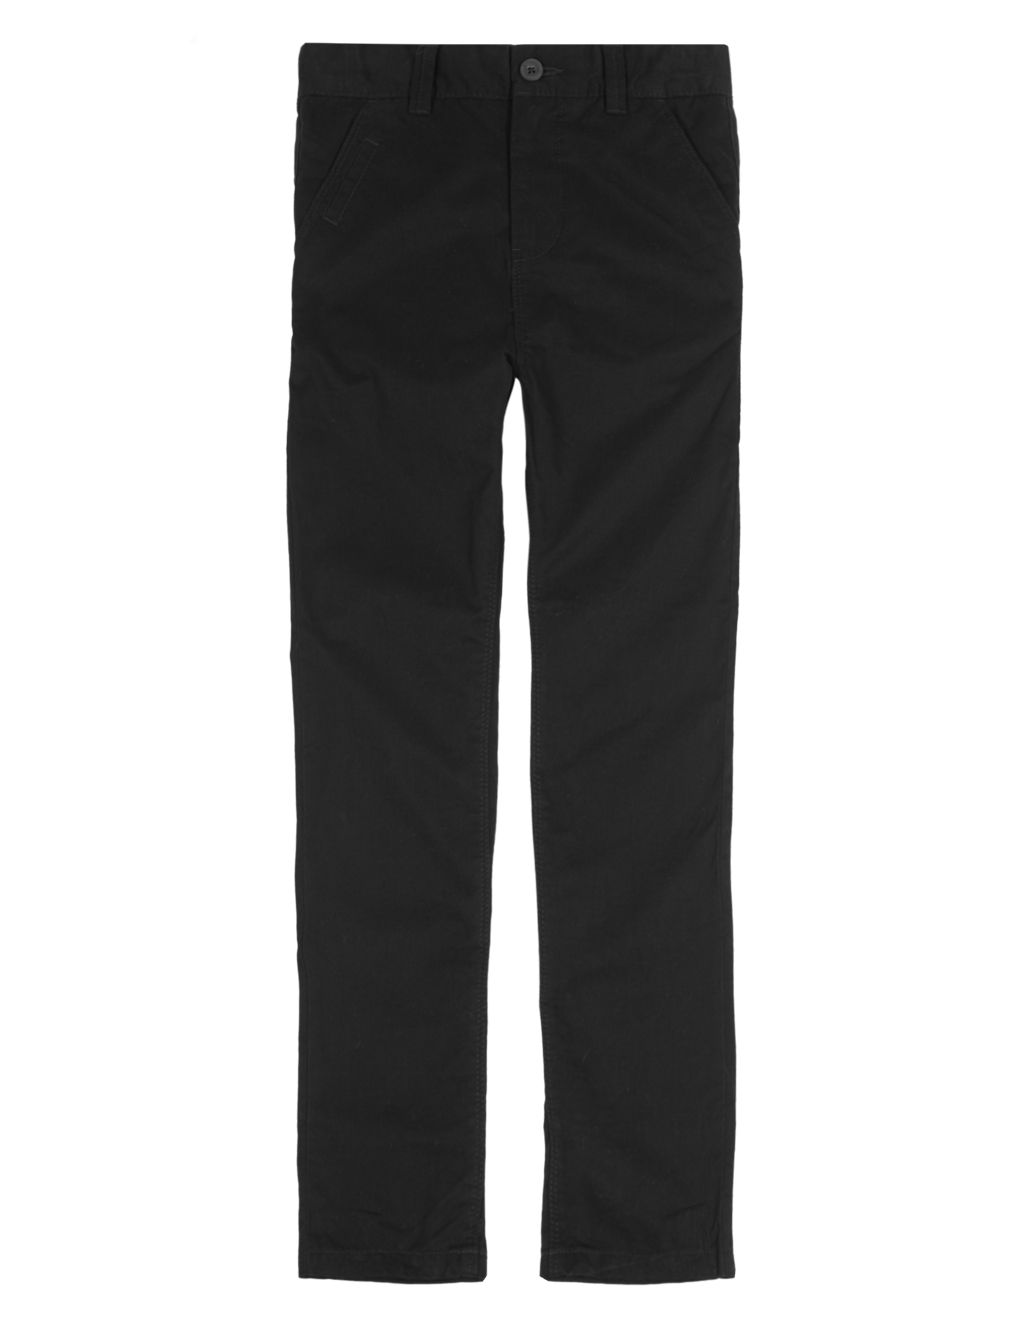 Boys' Pure Cotton Adjustable Waist Flat Front Skinny Chinos 1 of 6